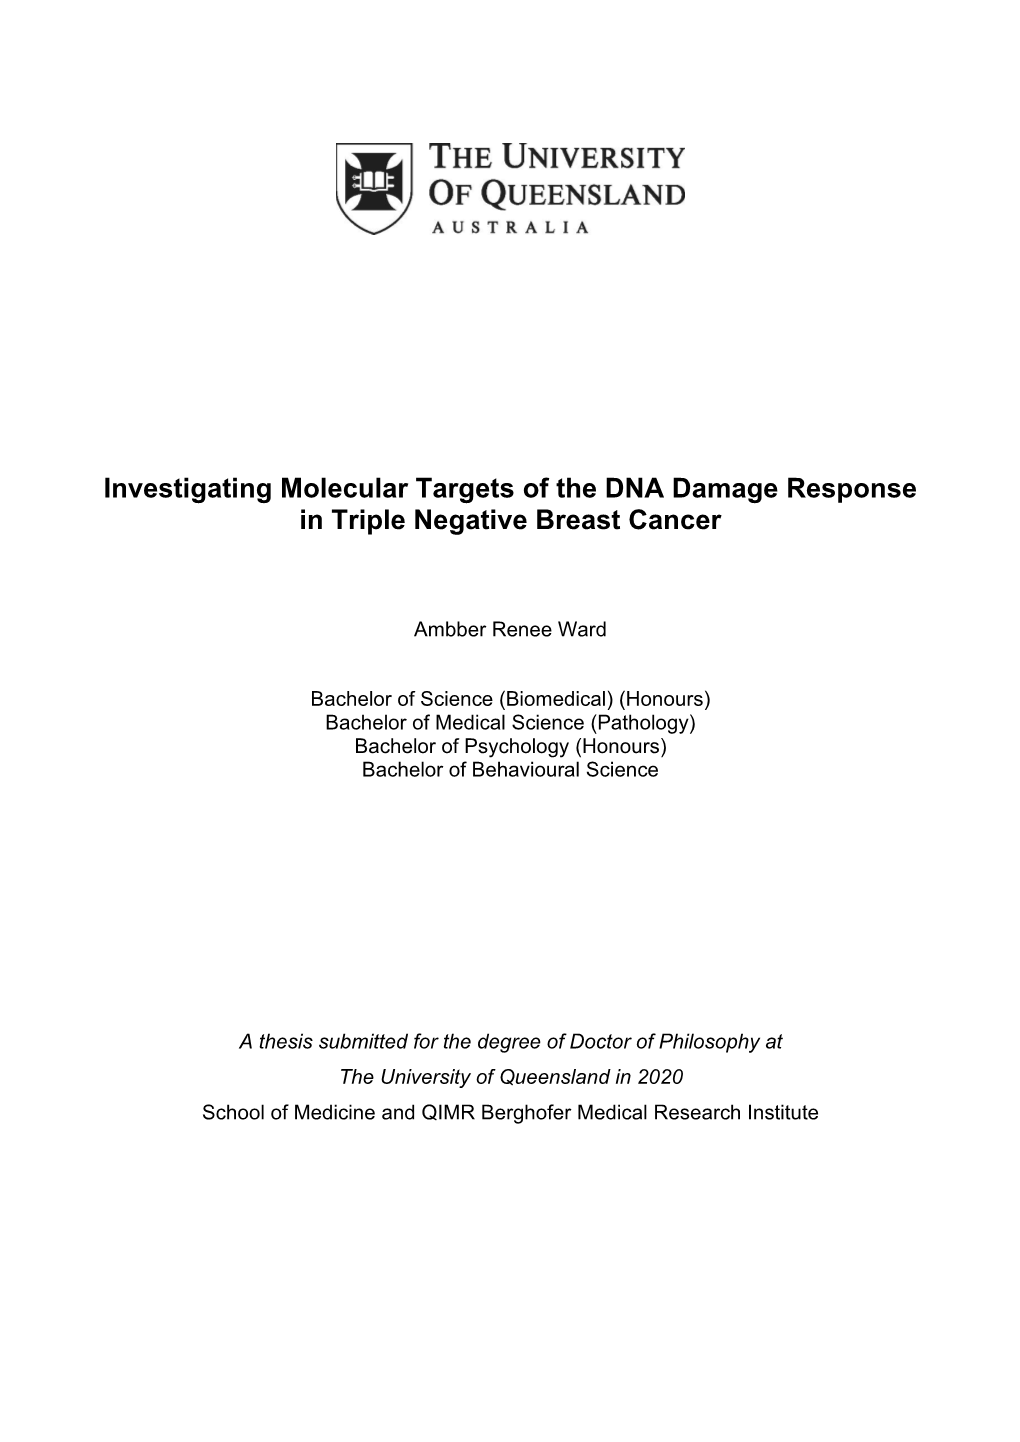 Investigating Molecular Targets of the DNA Damage Response in Triple Negative Breast Cancer